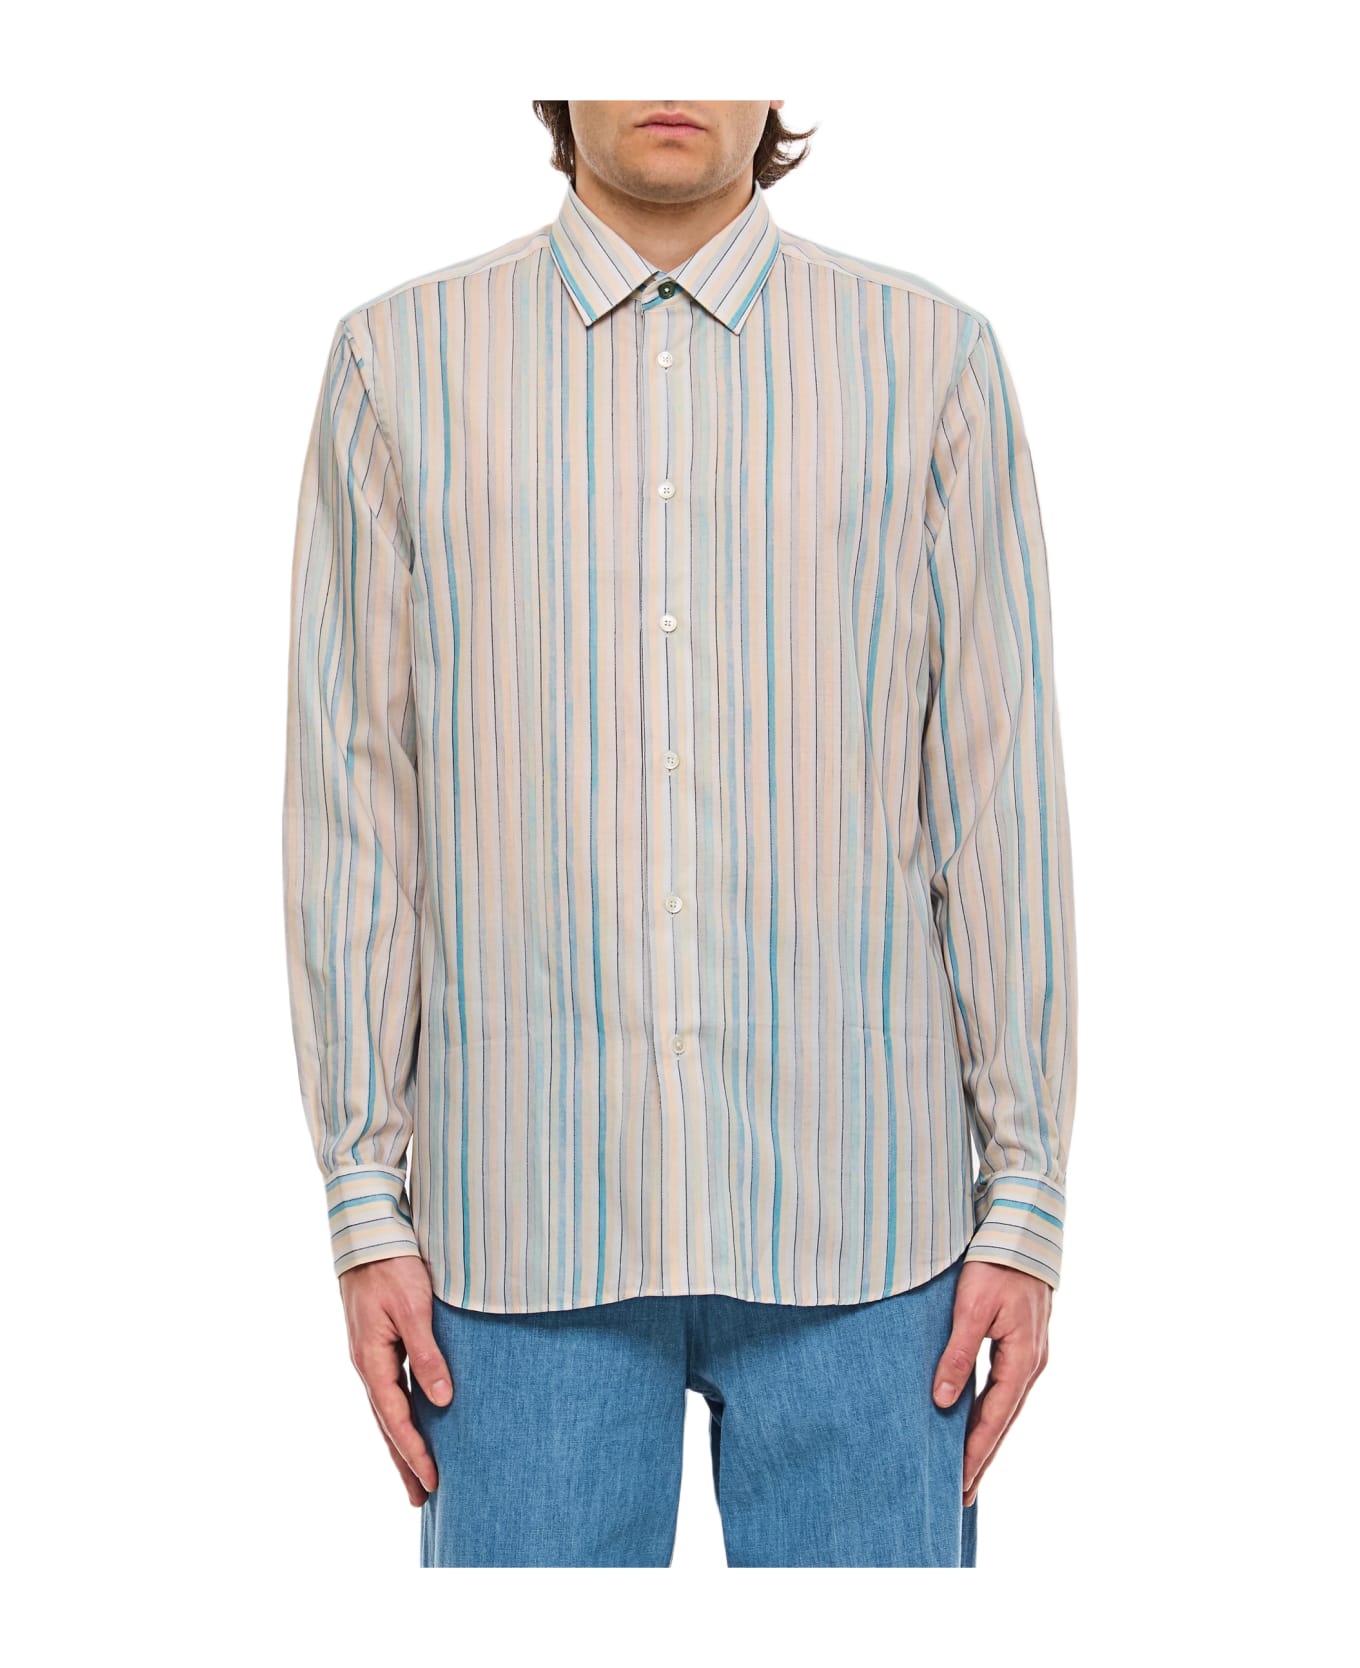 Paul Smith Mens S/c Tailored Fit Shirt - MultiColour シャツ